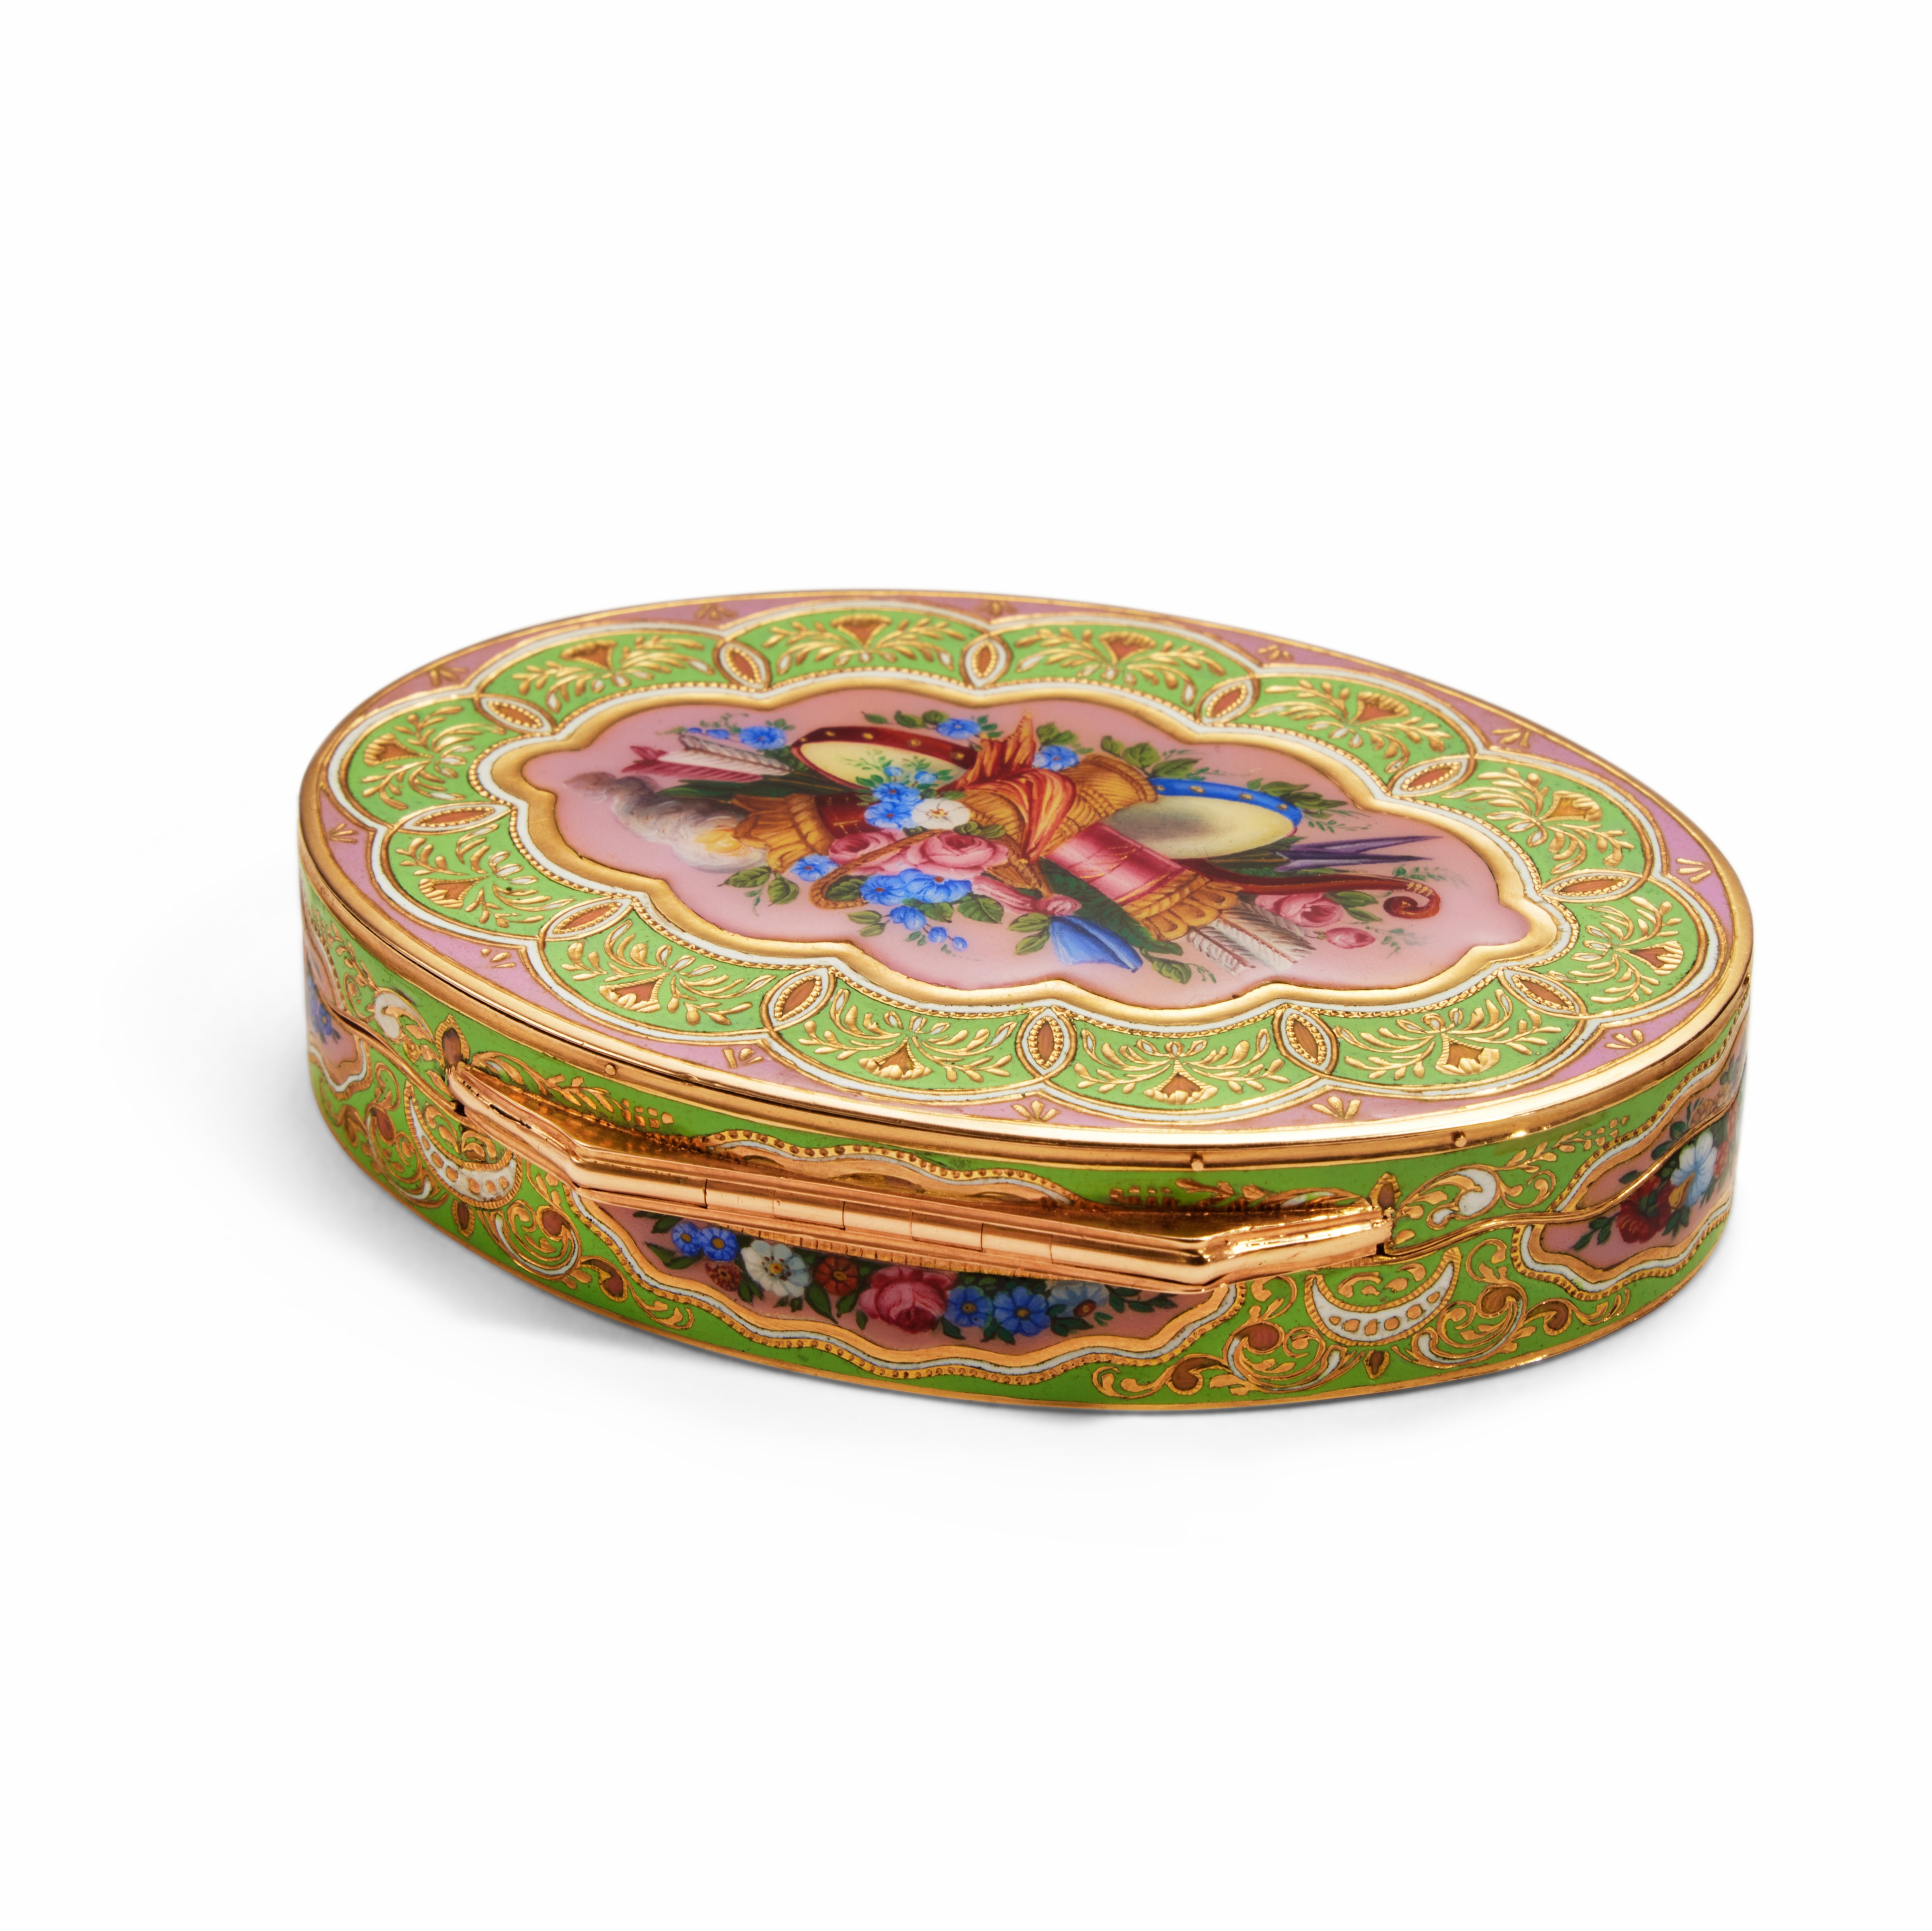 A Swiss Enameled Gold Snuff Box For The Turkish Market, Probably Geneva, Circa 1830 - Image 4 of 5